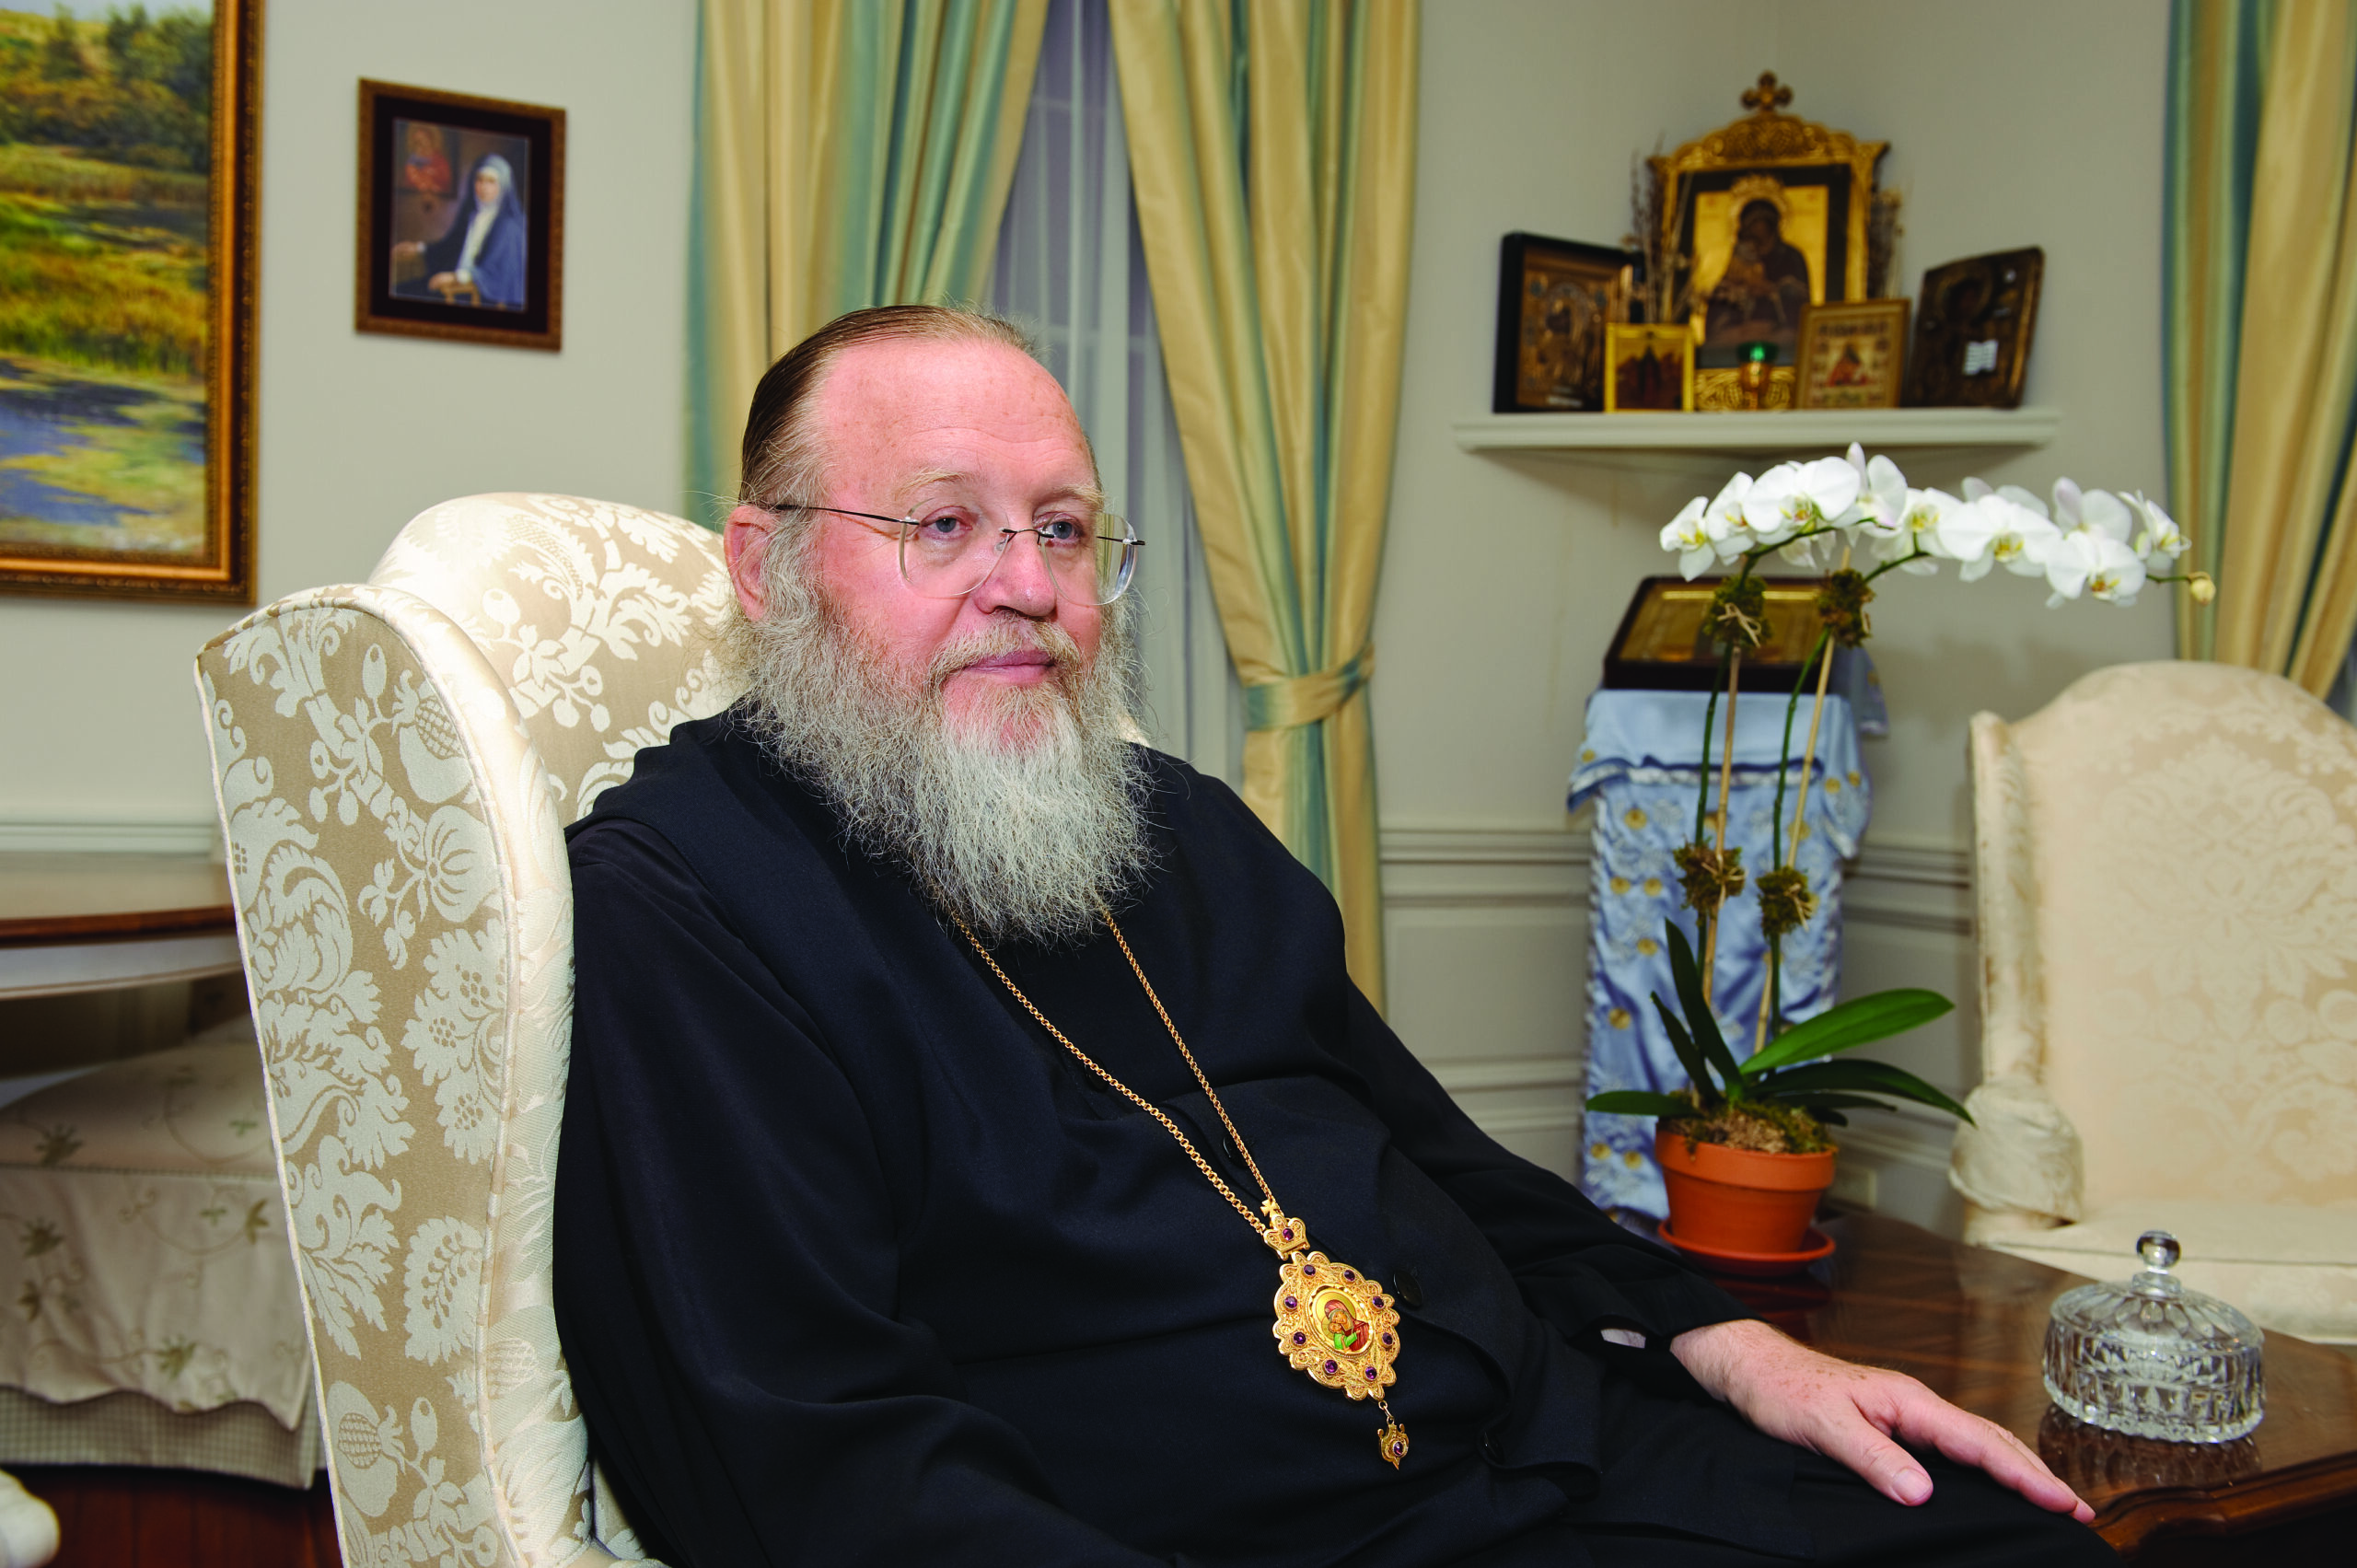 Metropolitan Hilarion in his residence at the Synod of Bishops